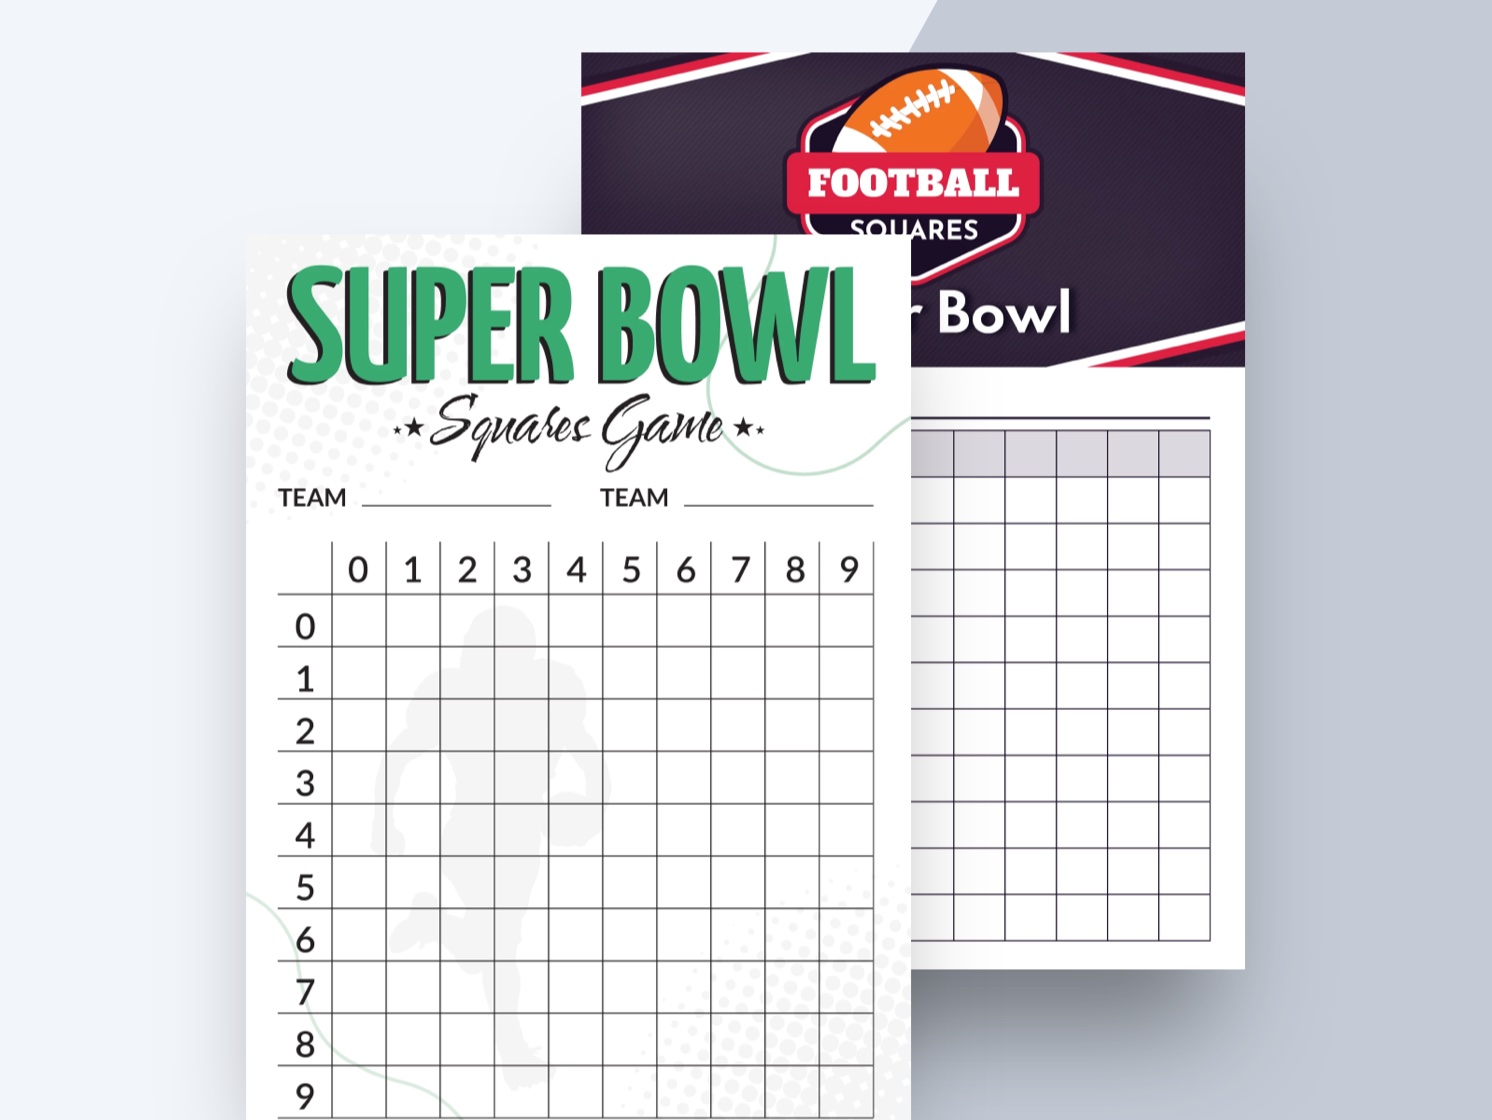 Super Bowl Squares Templates For Free Download